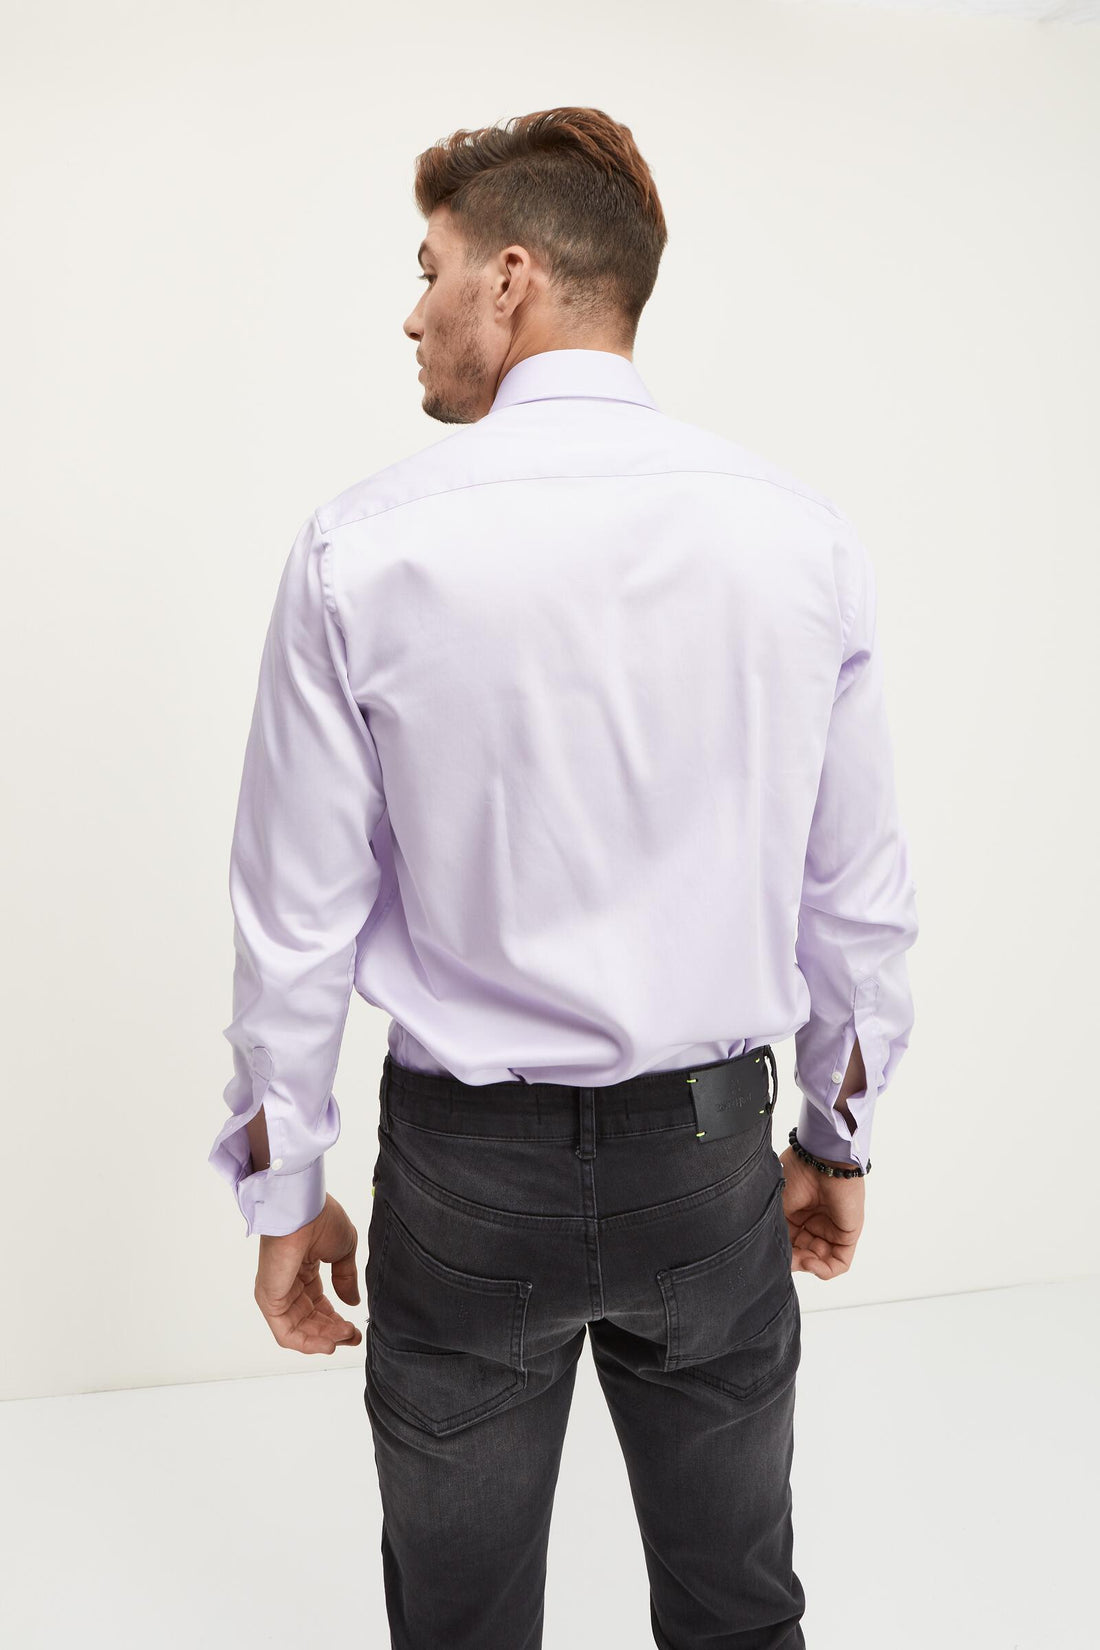 Pure Cotton Spread Collar Fitted Dress Shirt - Lavender - Ron Tomson